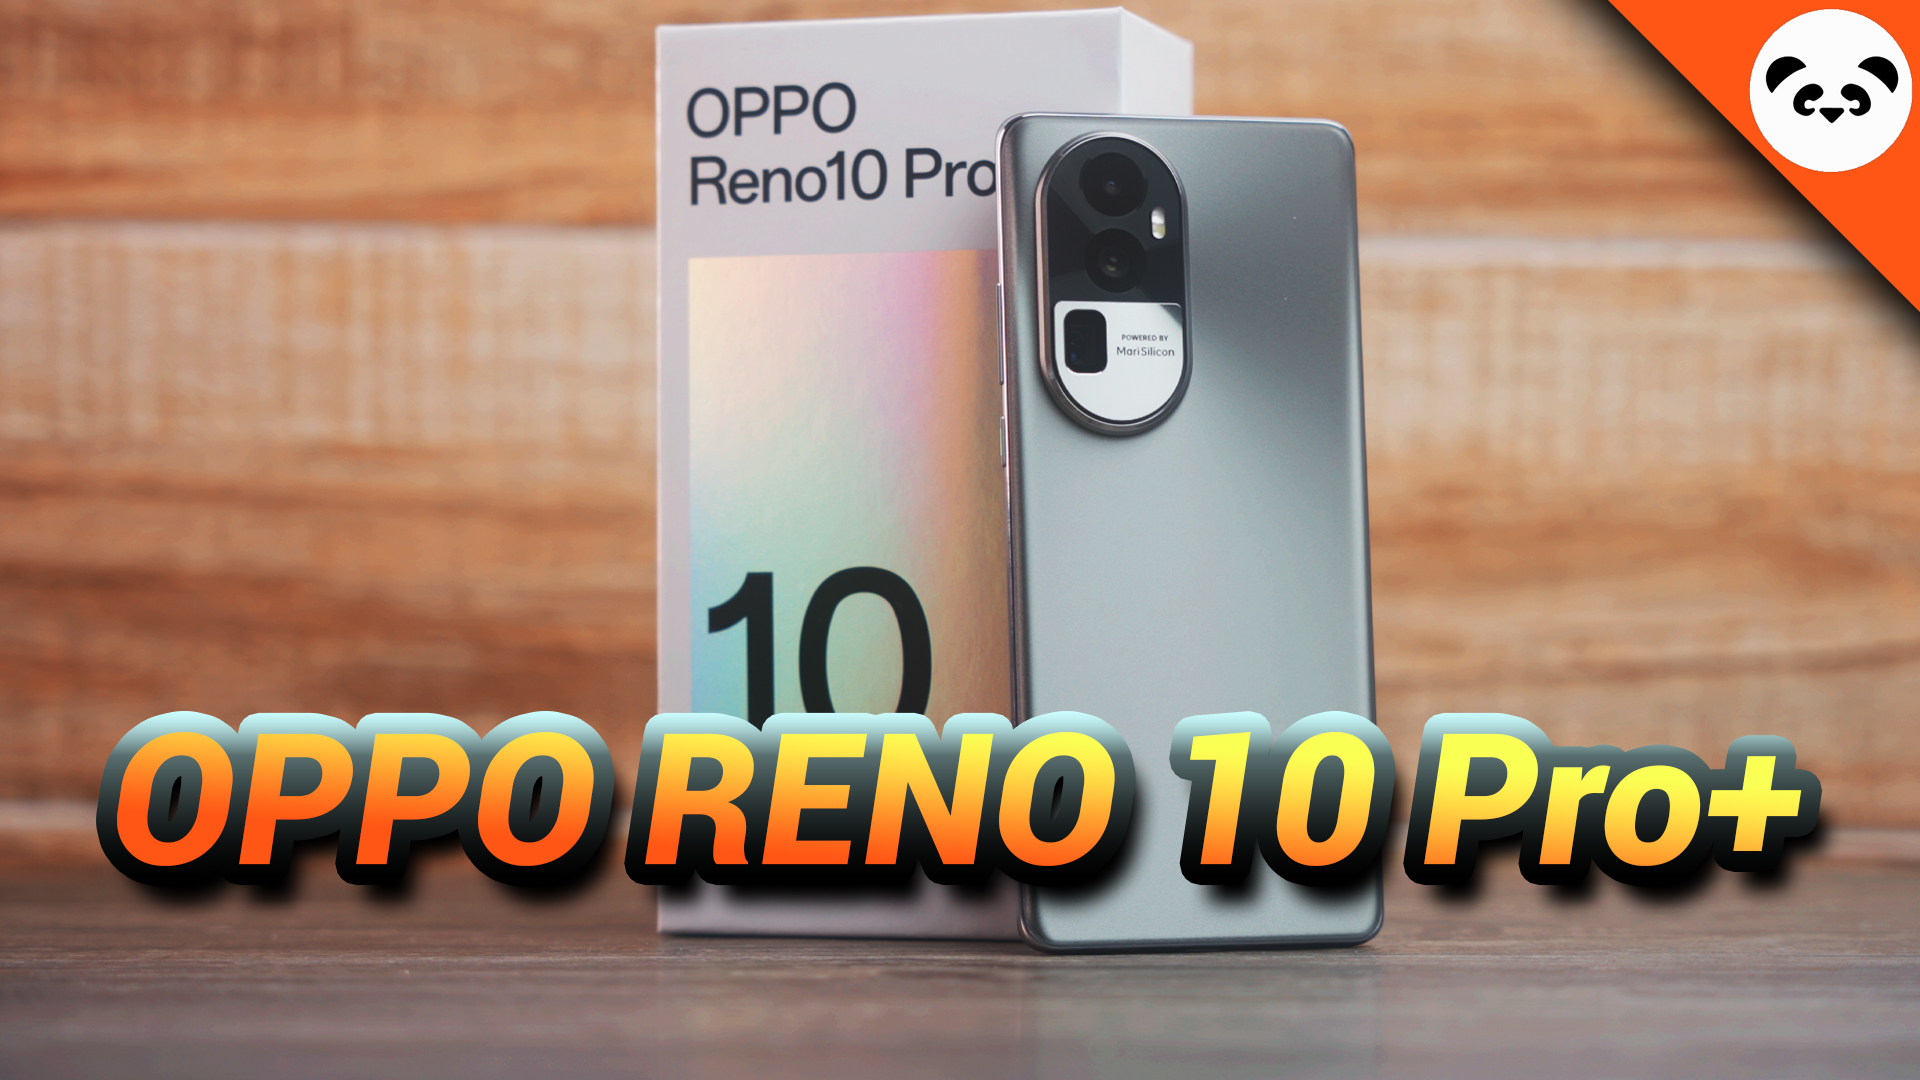 OPPO Reno10 Pro+ Review: The Perfect Blend of Art and Technology